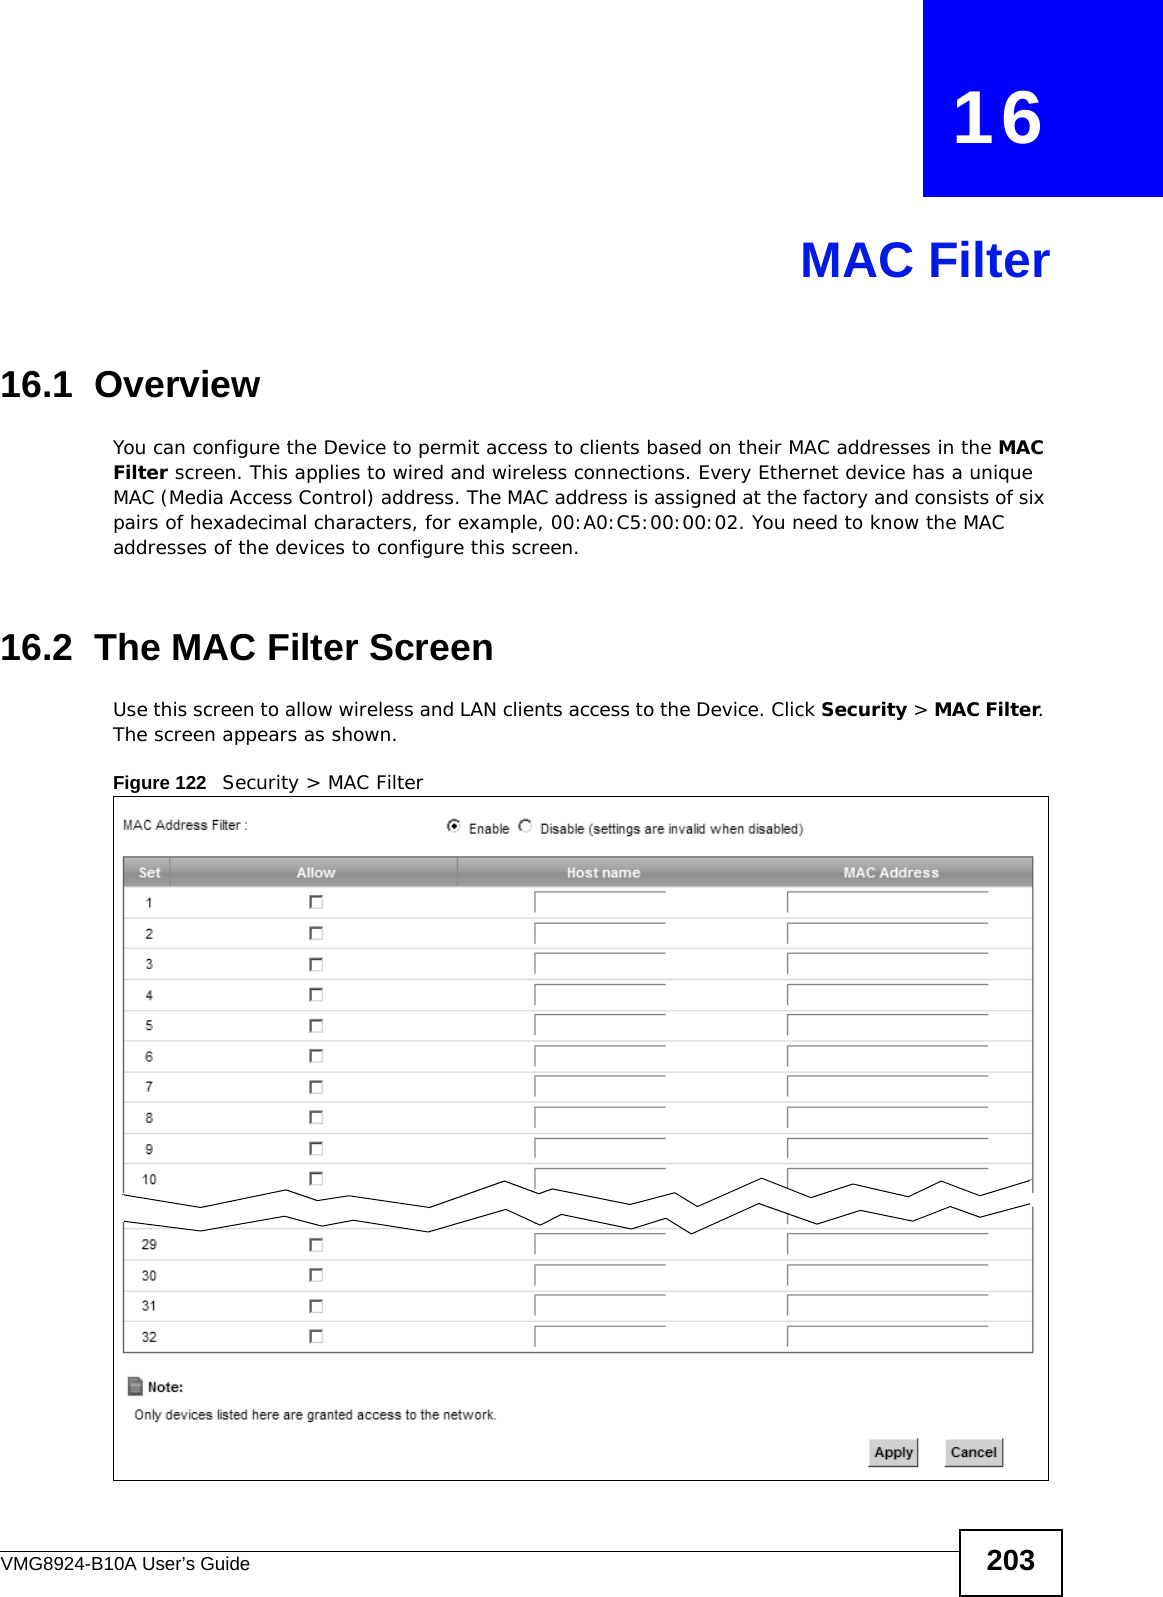 VMG8924-B10A User’s Guide 203CHAPTER   16MAC Filter16.1  Overview You can configure the Device to permit access to clients based on their MAC addresses in the MAC Filter screen. This applies to wired and wireless connections. Every Ethernet device has a unique MAC (Media Access Control) address. The MAC address is assigned at the factory and consists of six pairs of hexadecimal characters, for example, 00:A0:C5:00:00:02. You need to know the MAC addresses of the devices to configure this screen.16.2  The MAC Filter ScreenUse this screen to allow wireless and LAN clients access to the Device. Click Security &gt; MAC Filter. The screen appears as shown.Figure 122   Security &gt; MAC Filter